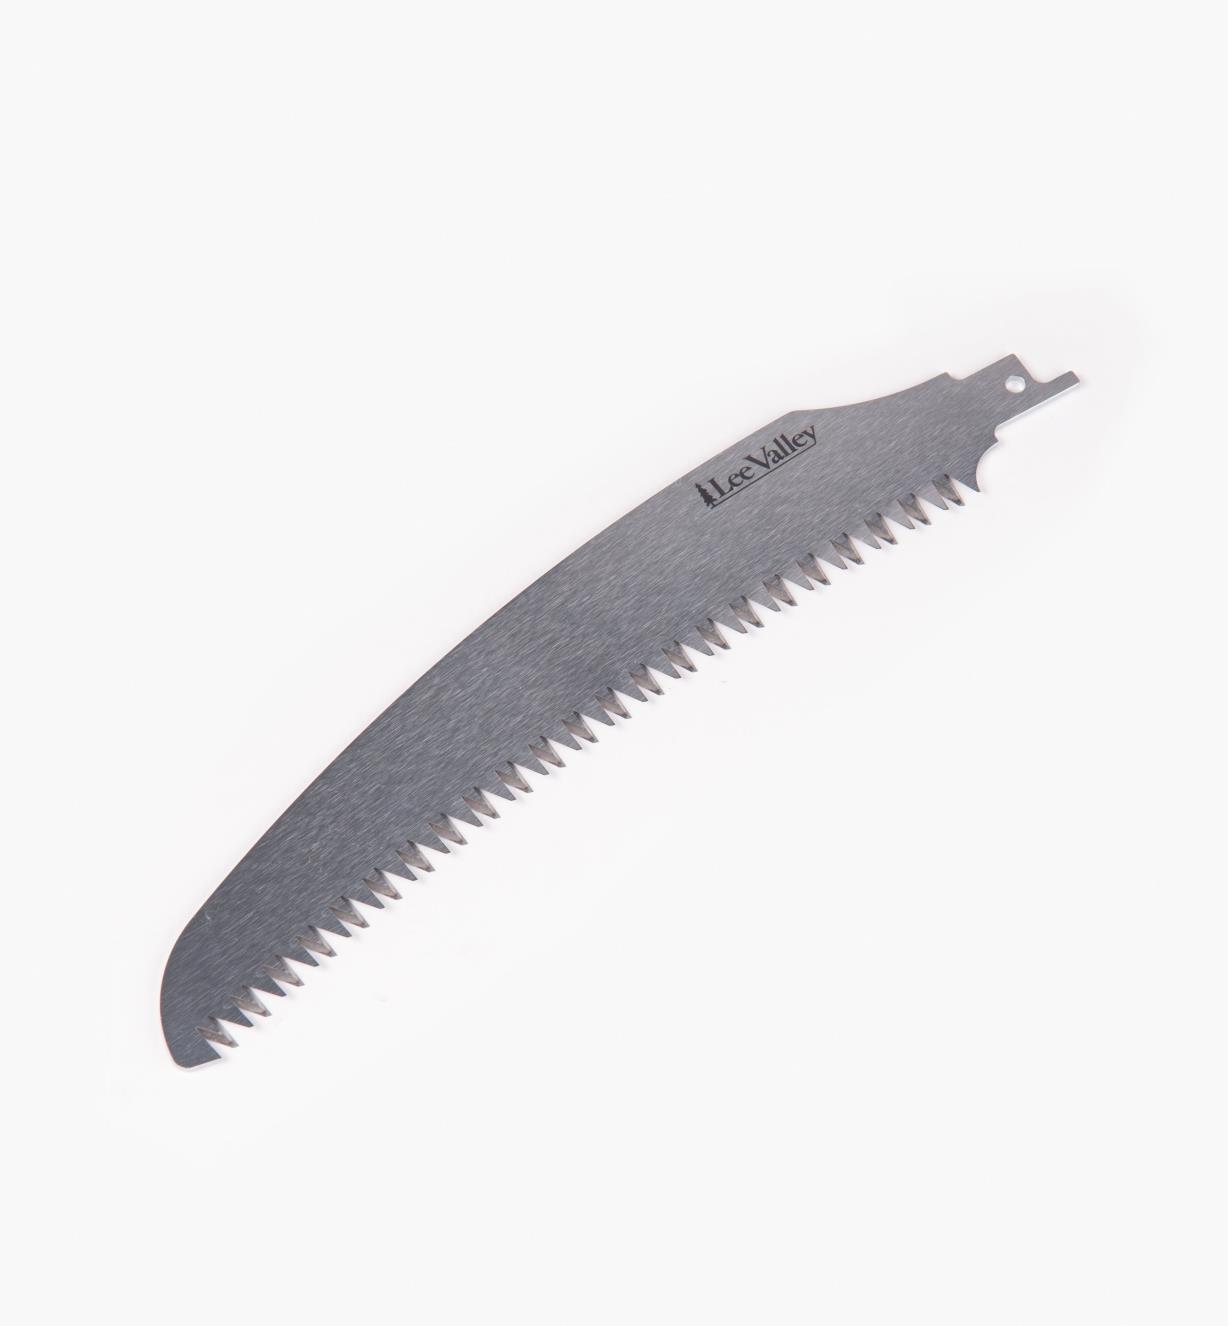 EC680 - Lee Valley Pruning Blade for Reciprocating Saws